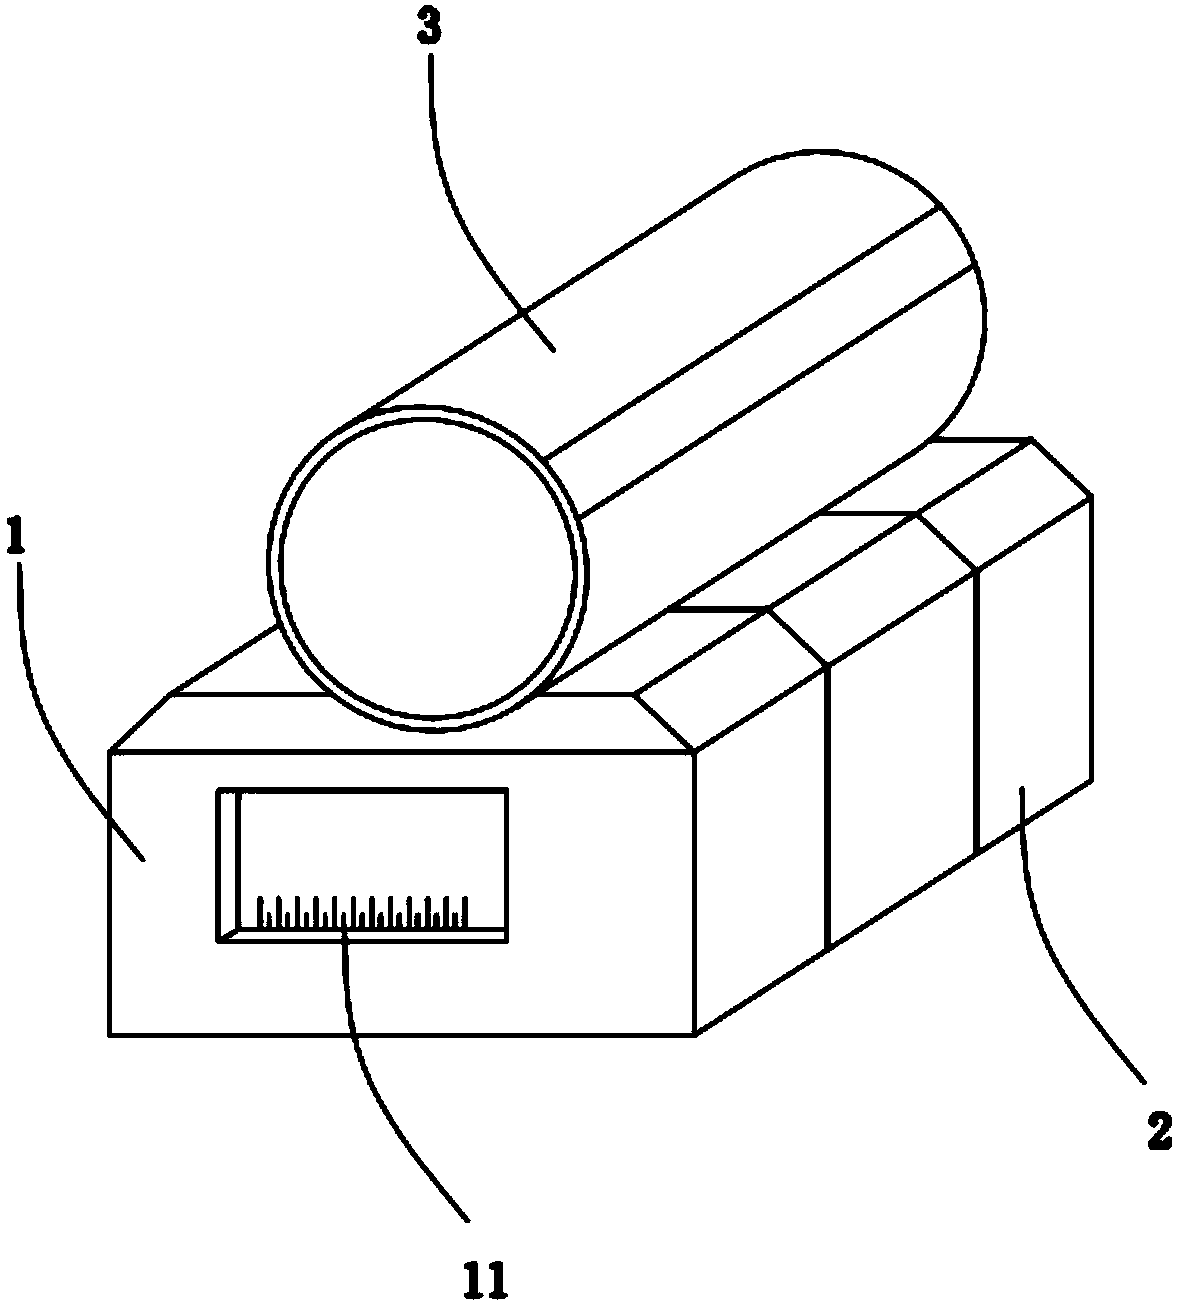 Water pipe pressure detecting and controlling device